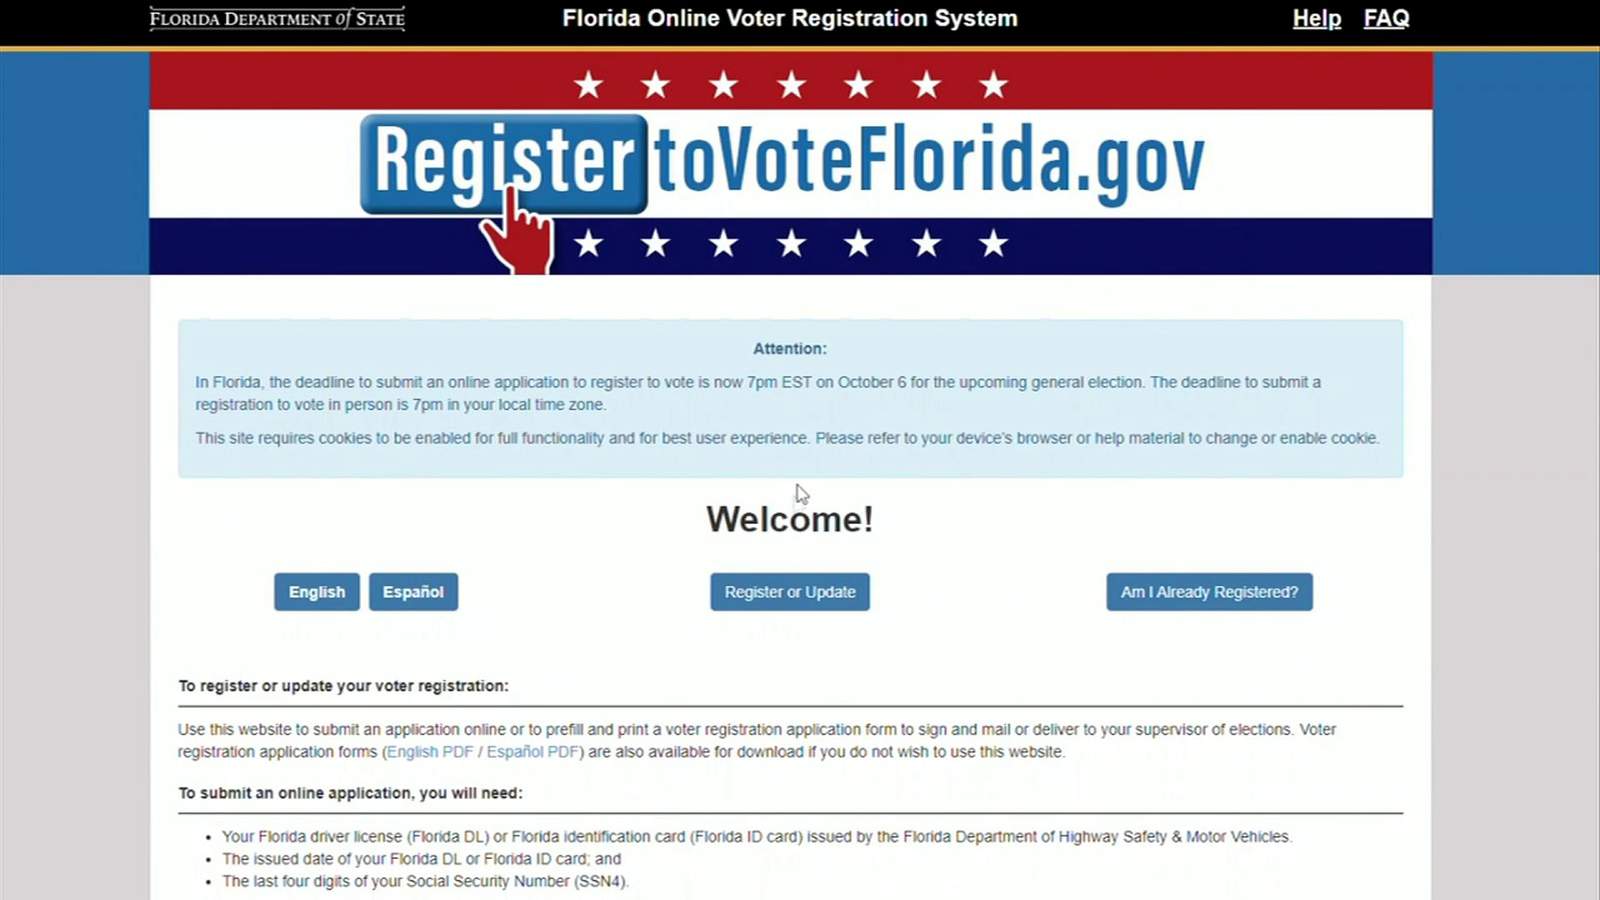 Voter registration could be reopened in Florida